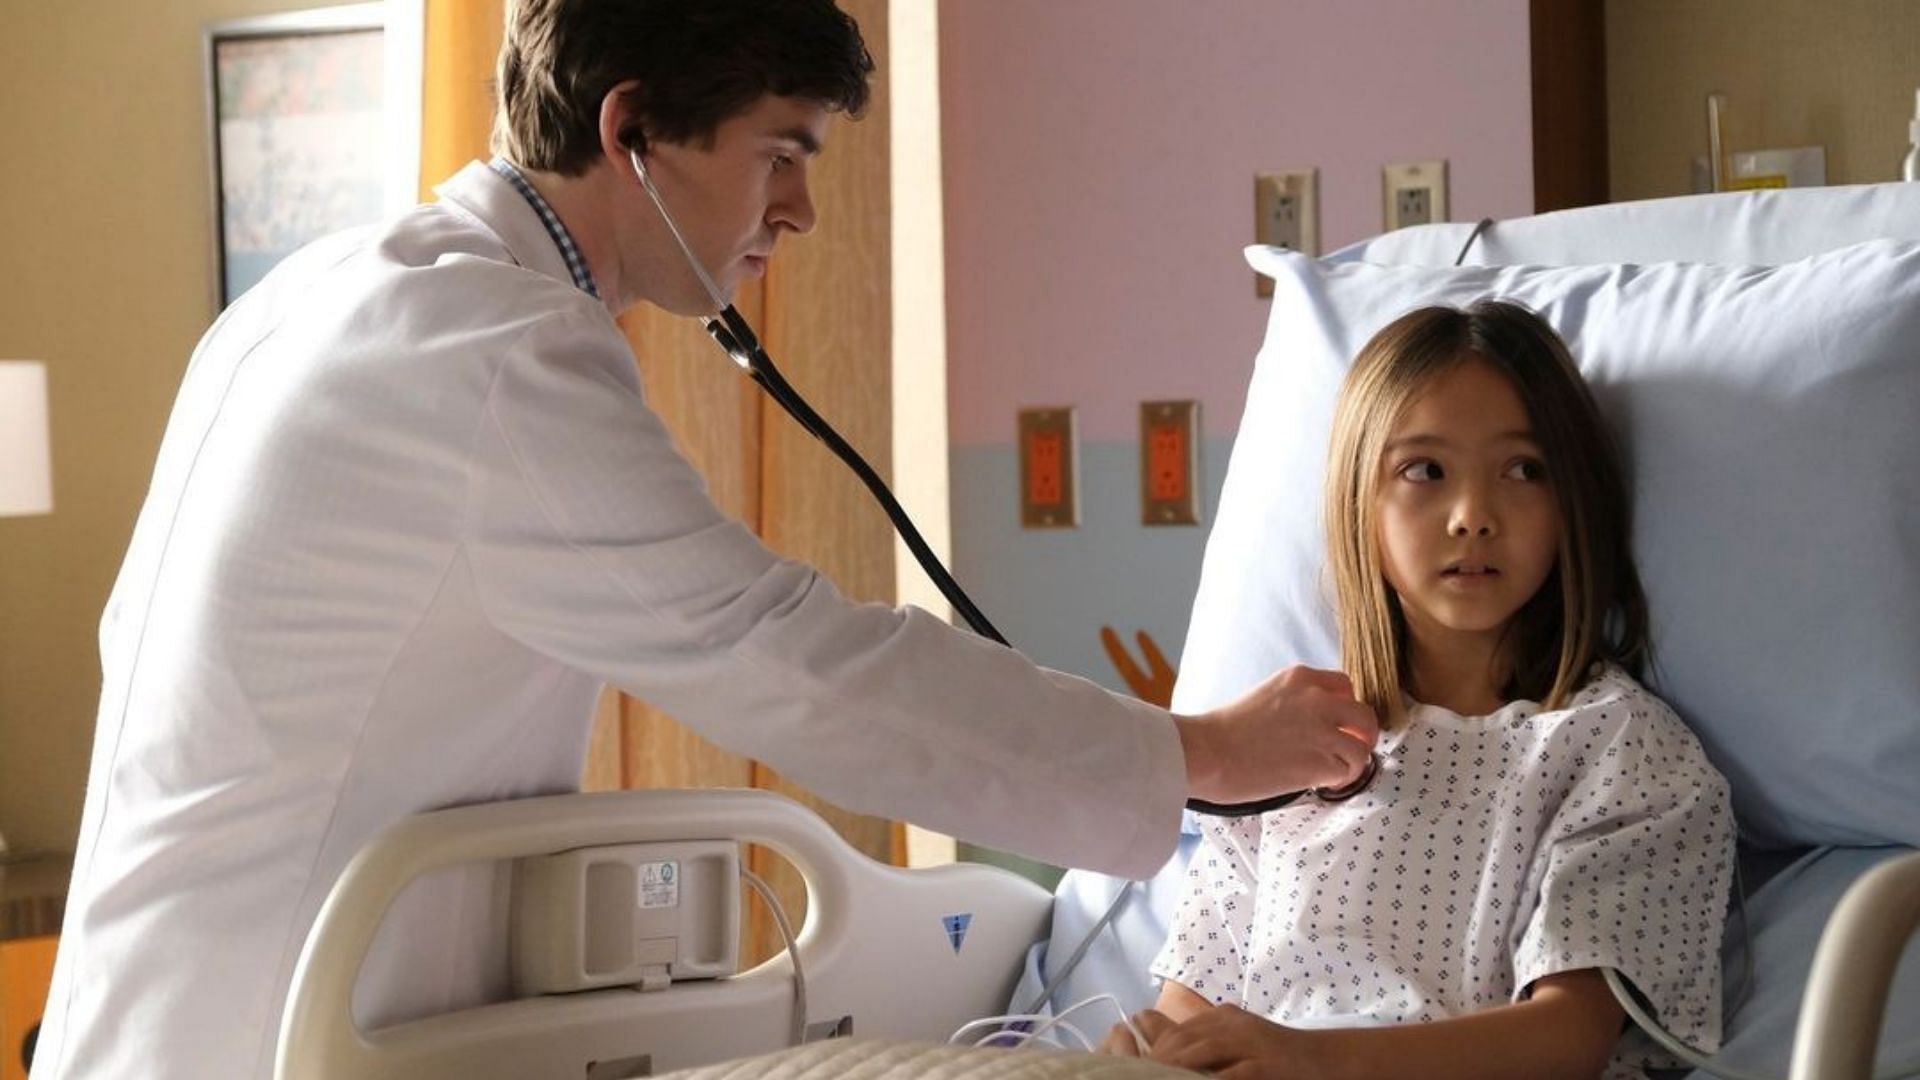 A still from The Good Doctor Season 5 Episode 11 (Image Via thegooddoctorabc @Instagram)